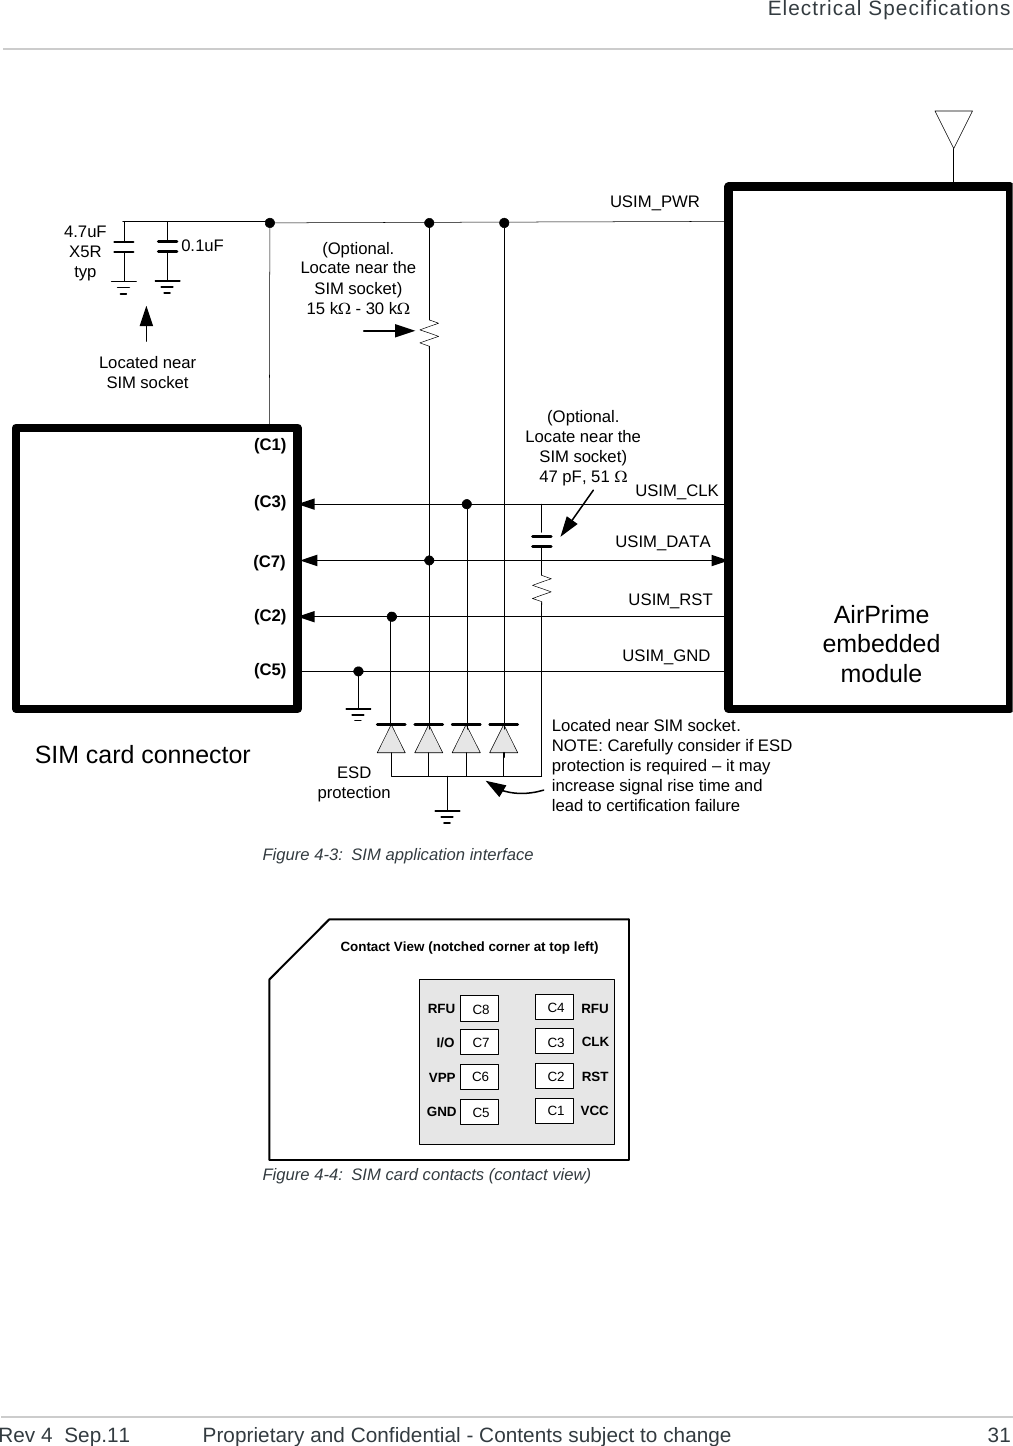 Electrical SpecificationsRev 4  Sep.11 Proprietary and Confidential - Contents subject to change 31Figure 4-3: SIM application interfaceFigure 4-4: SIM card contacts (contact view)AirPrime embedded moduleSIM card connector(Optional. Locate near the SIM socket)47 pF, 51 4.7uFX5Rtyp(C1)USIM_PWRUSIM_CLKUSIM_DATAUSIM_RSTLocated near SIM socketLocated near SIM socket.NOTE: Carefully consider if ESD protection is required – it may increase signal rise time and lead to certification failureUSIM_GNDESD protection(C3)(C7)(C2)(C5)(Optional. Locate near the SIM socket)15 k - 30 k0.1uFC8C7C6C5C4C3C2C1GND VCCVPP RSTI/O CLKRFU RFUContact View (notched corner at top left)